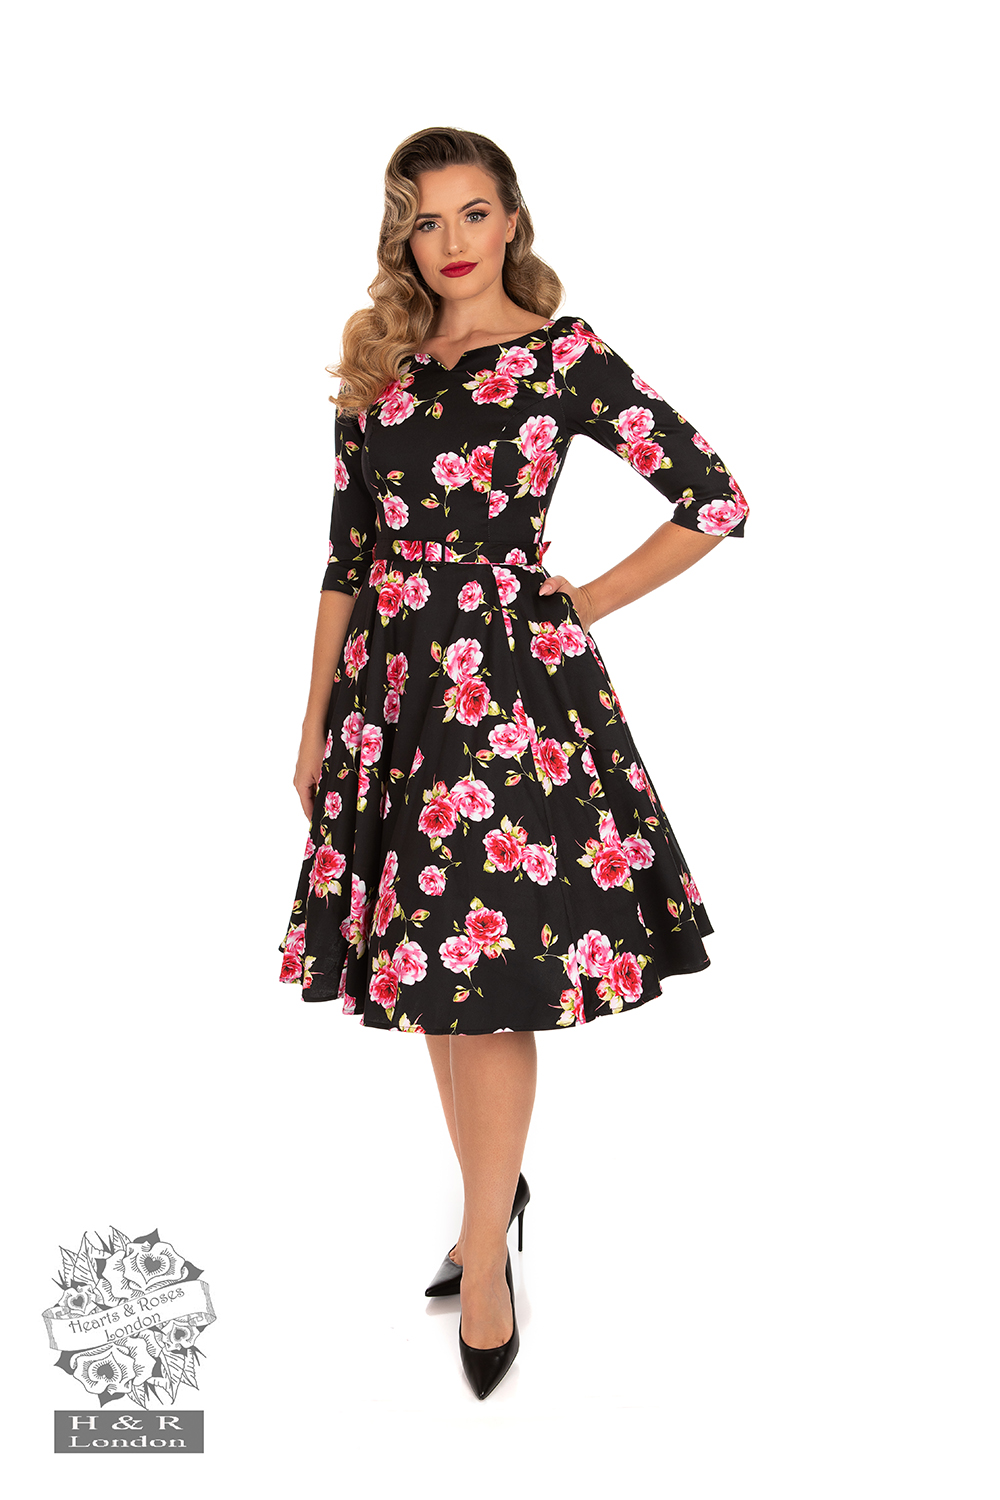 Ava Floral Swing Dress in Black/Pink - Hearts & Roses London